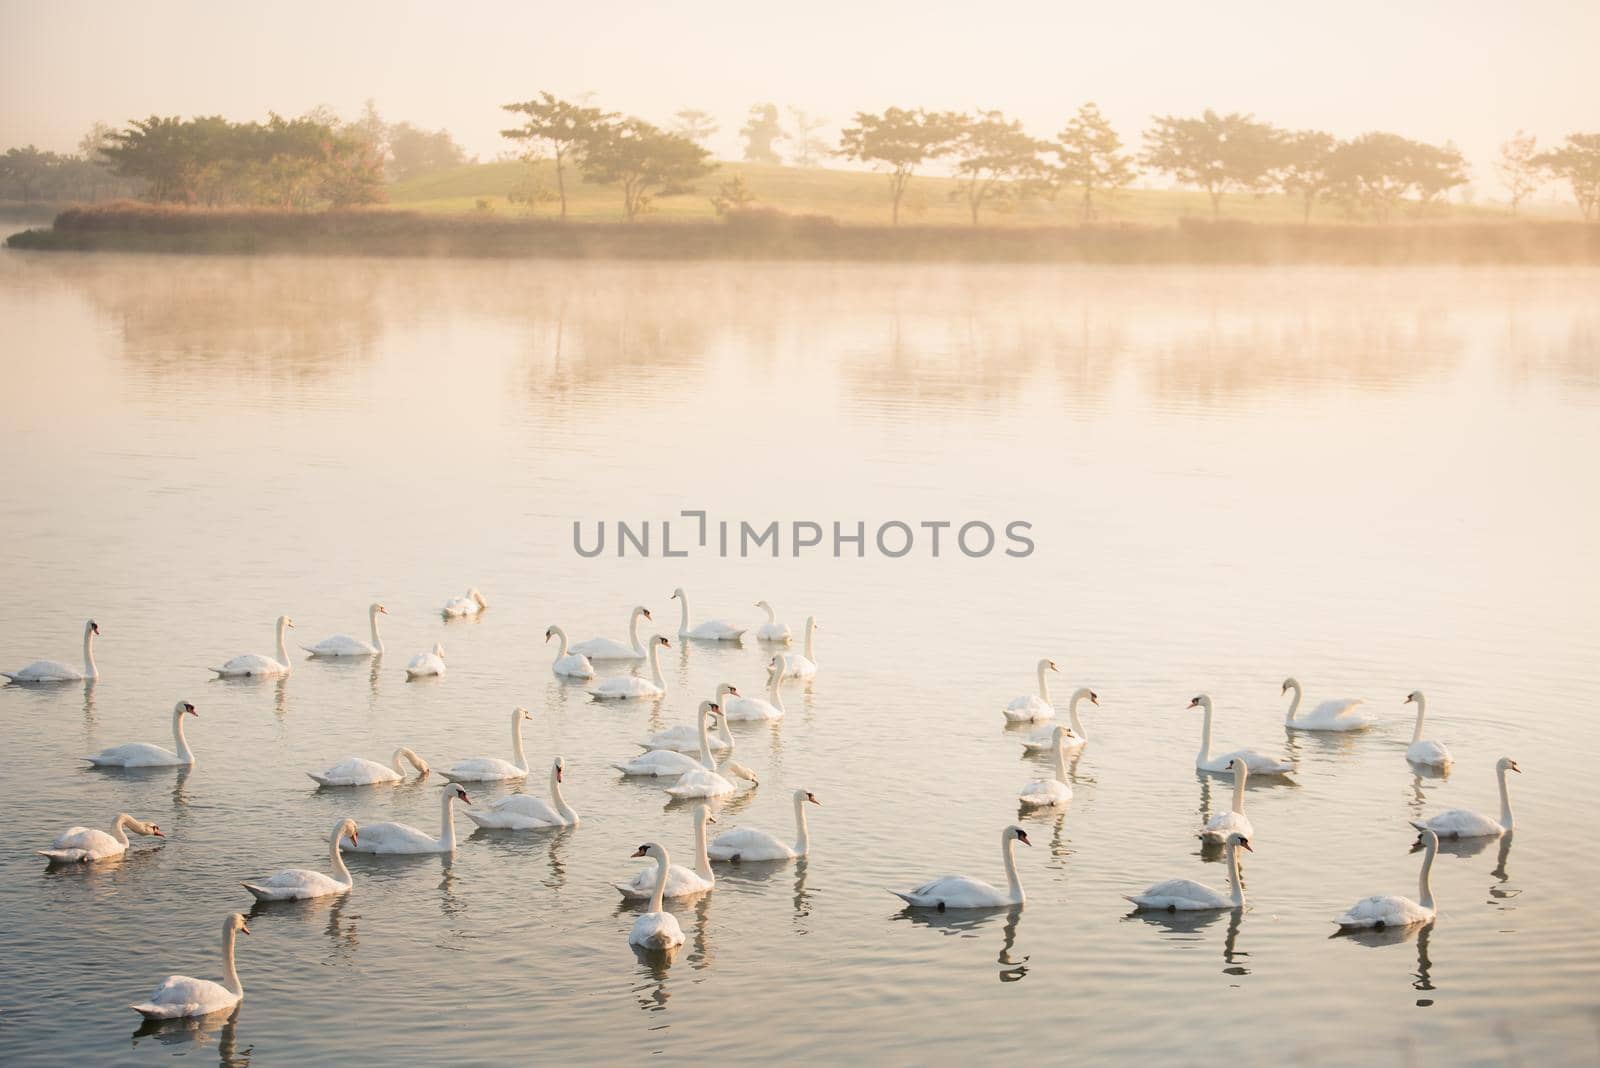 swans in lake at sunrise by Wmpix